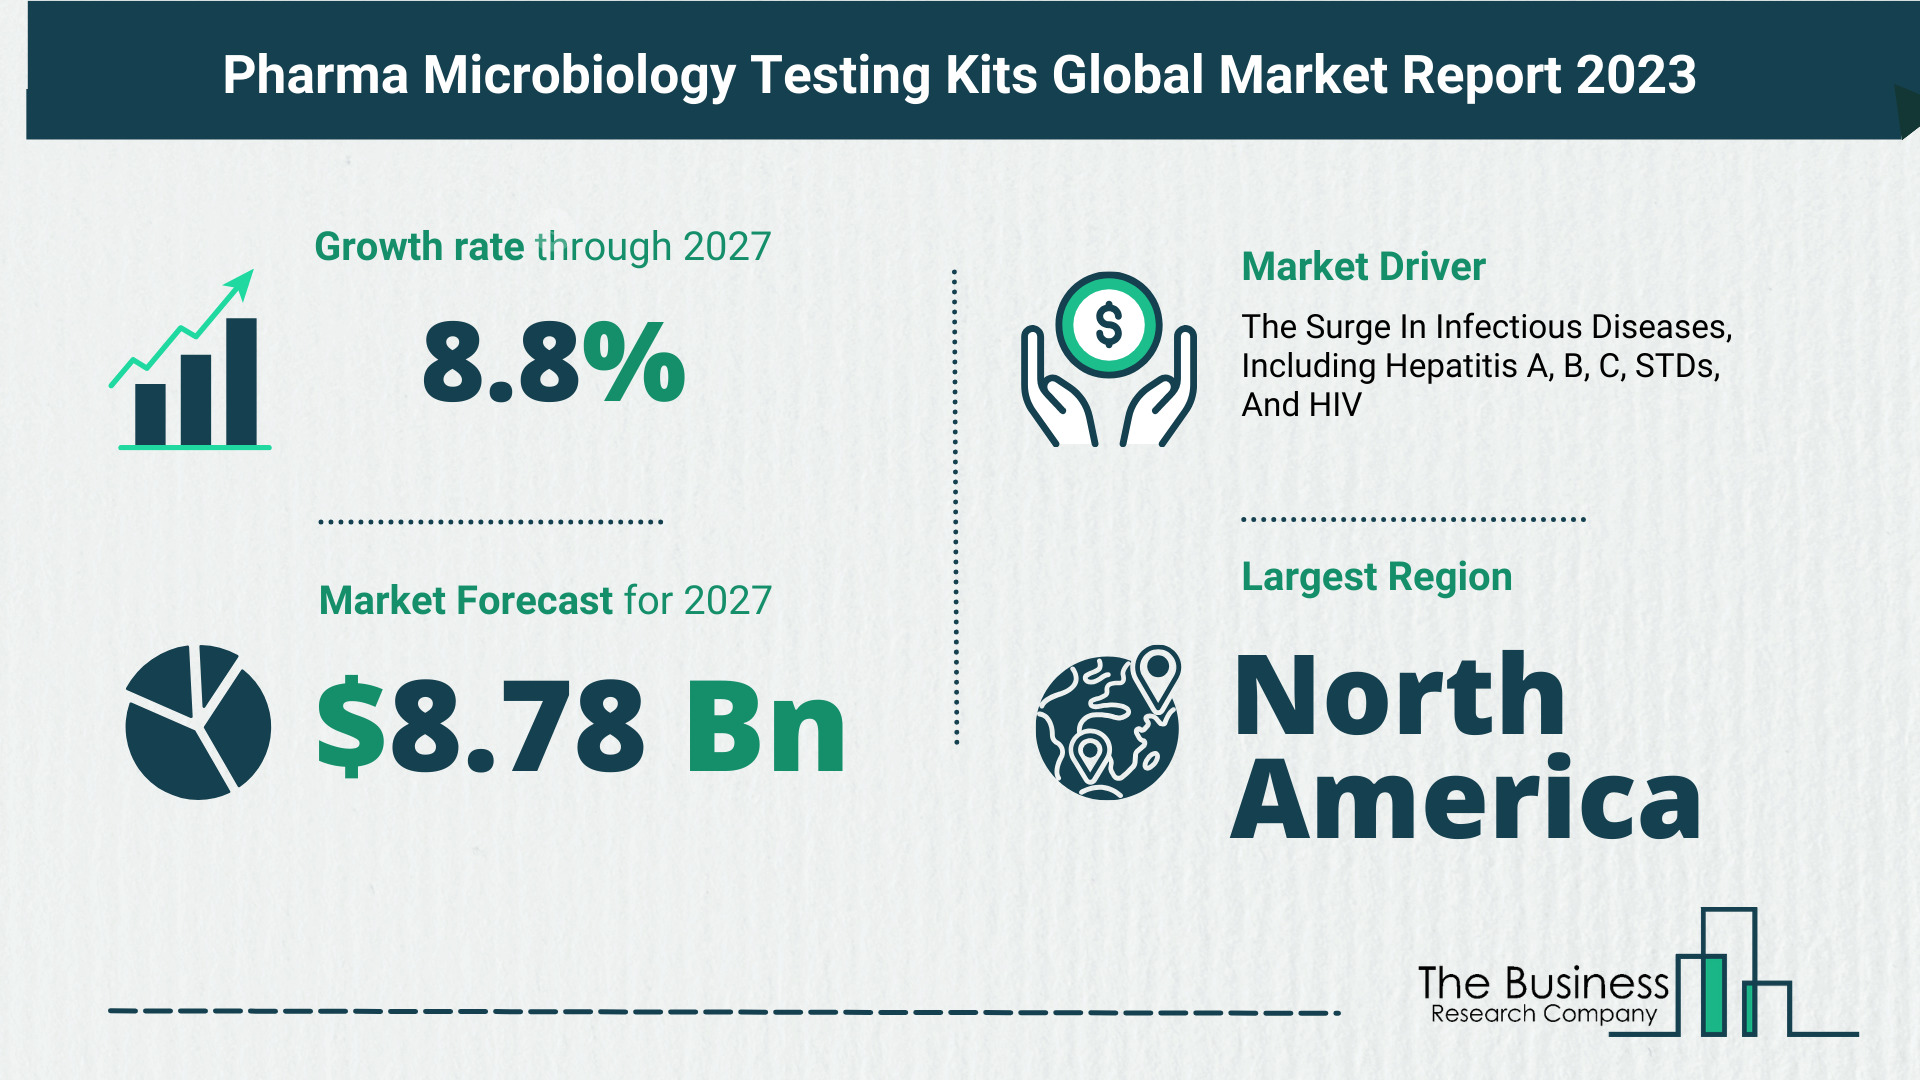 Understand How The Pharma Microbiology Testing Kits Market Is Poised To Grow Through 2023-2032